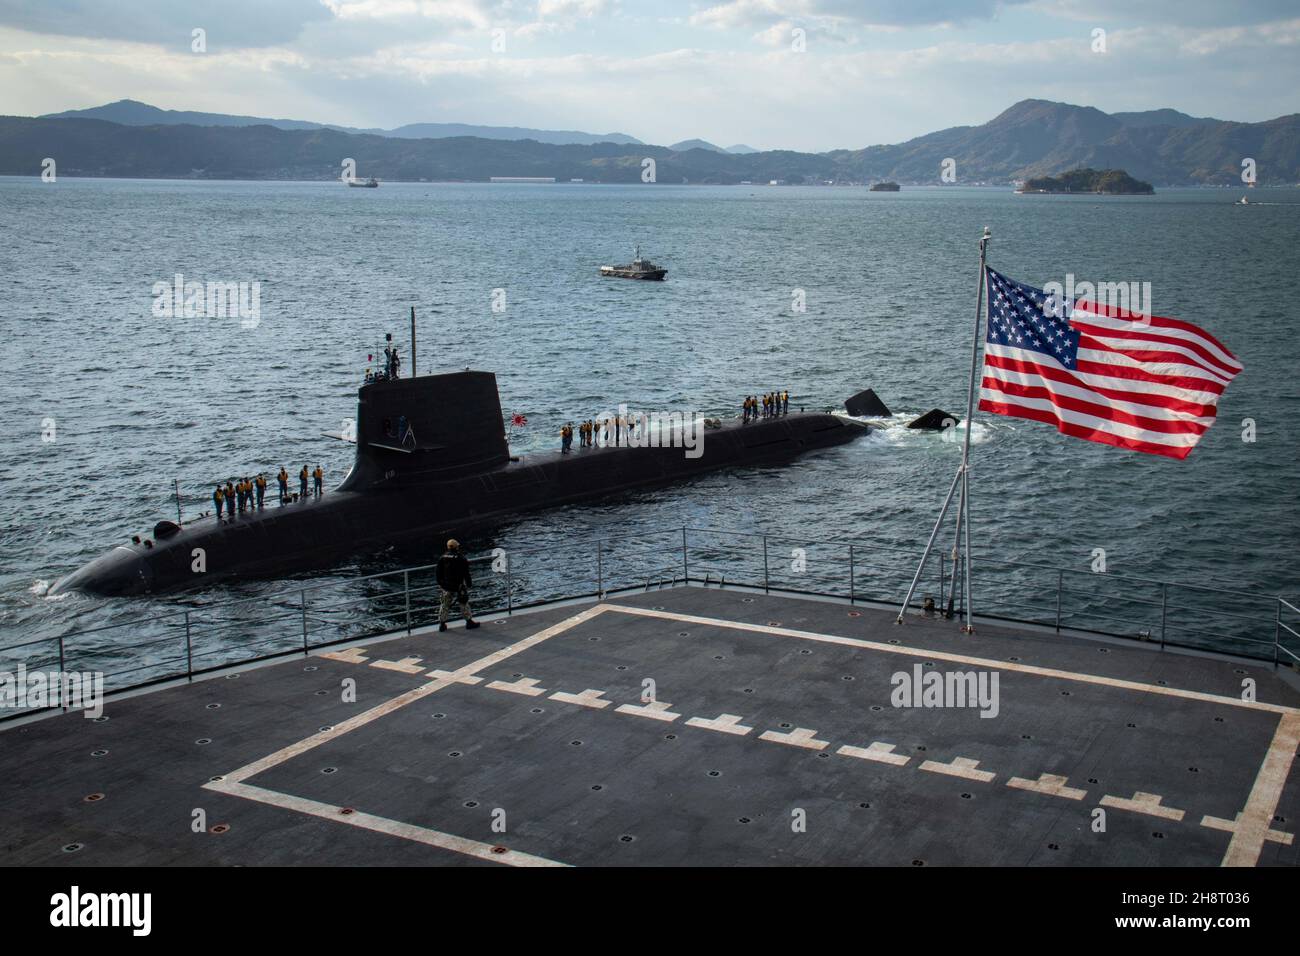 KURE, Japan (Nov. 25, 2021) The Japan Maritime Self-Defense Force Soryu-class submarine JS Sekiryu (SS 508) departs from alongside the Emory S. Land-class submarine tender USS Frank Cable (AS 40) during a refueling lineup exercise, Nov. 25. Frank Cable is moored at the JMSDF Kure Naval Base, Japan, as part of their patrol conducting expeditionary maintenance and logistics in support of national security in the U.S. 7th Fleet area of operations. ( (U.S. Navy photo by Mass Communication Specialist 1st Class Jonathan B. Trejo/Released) Stock Photo